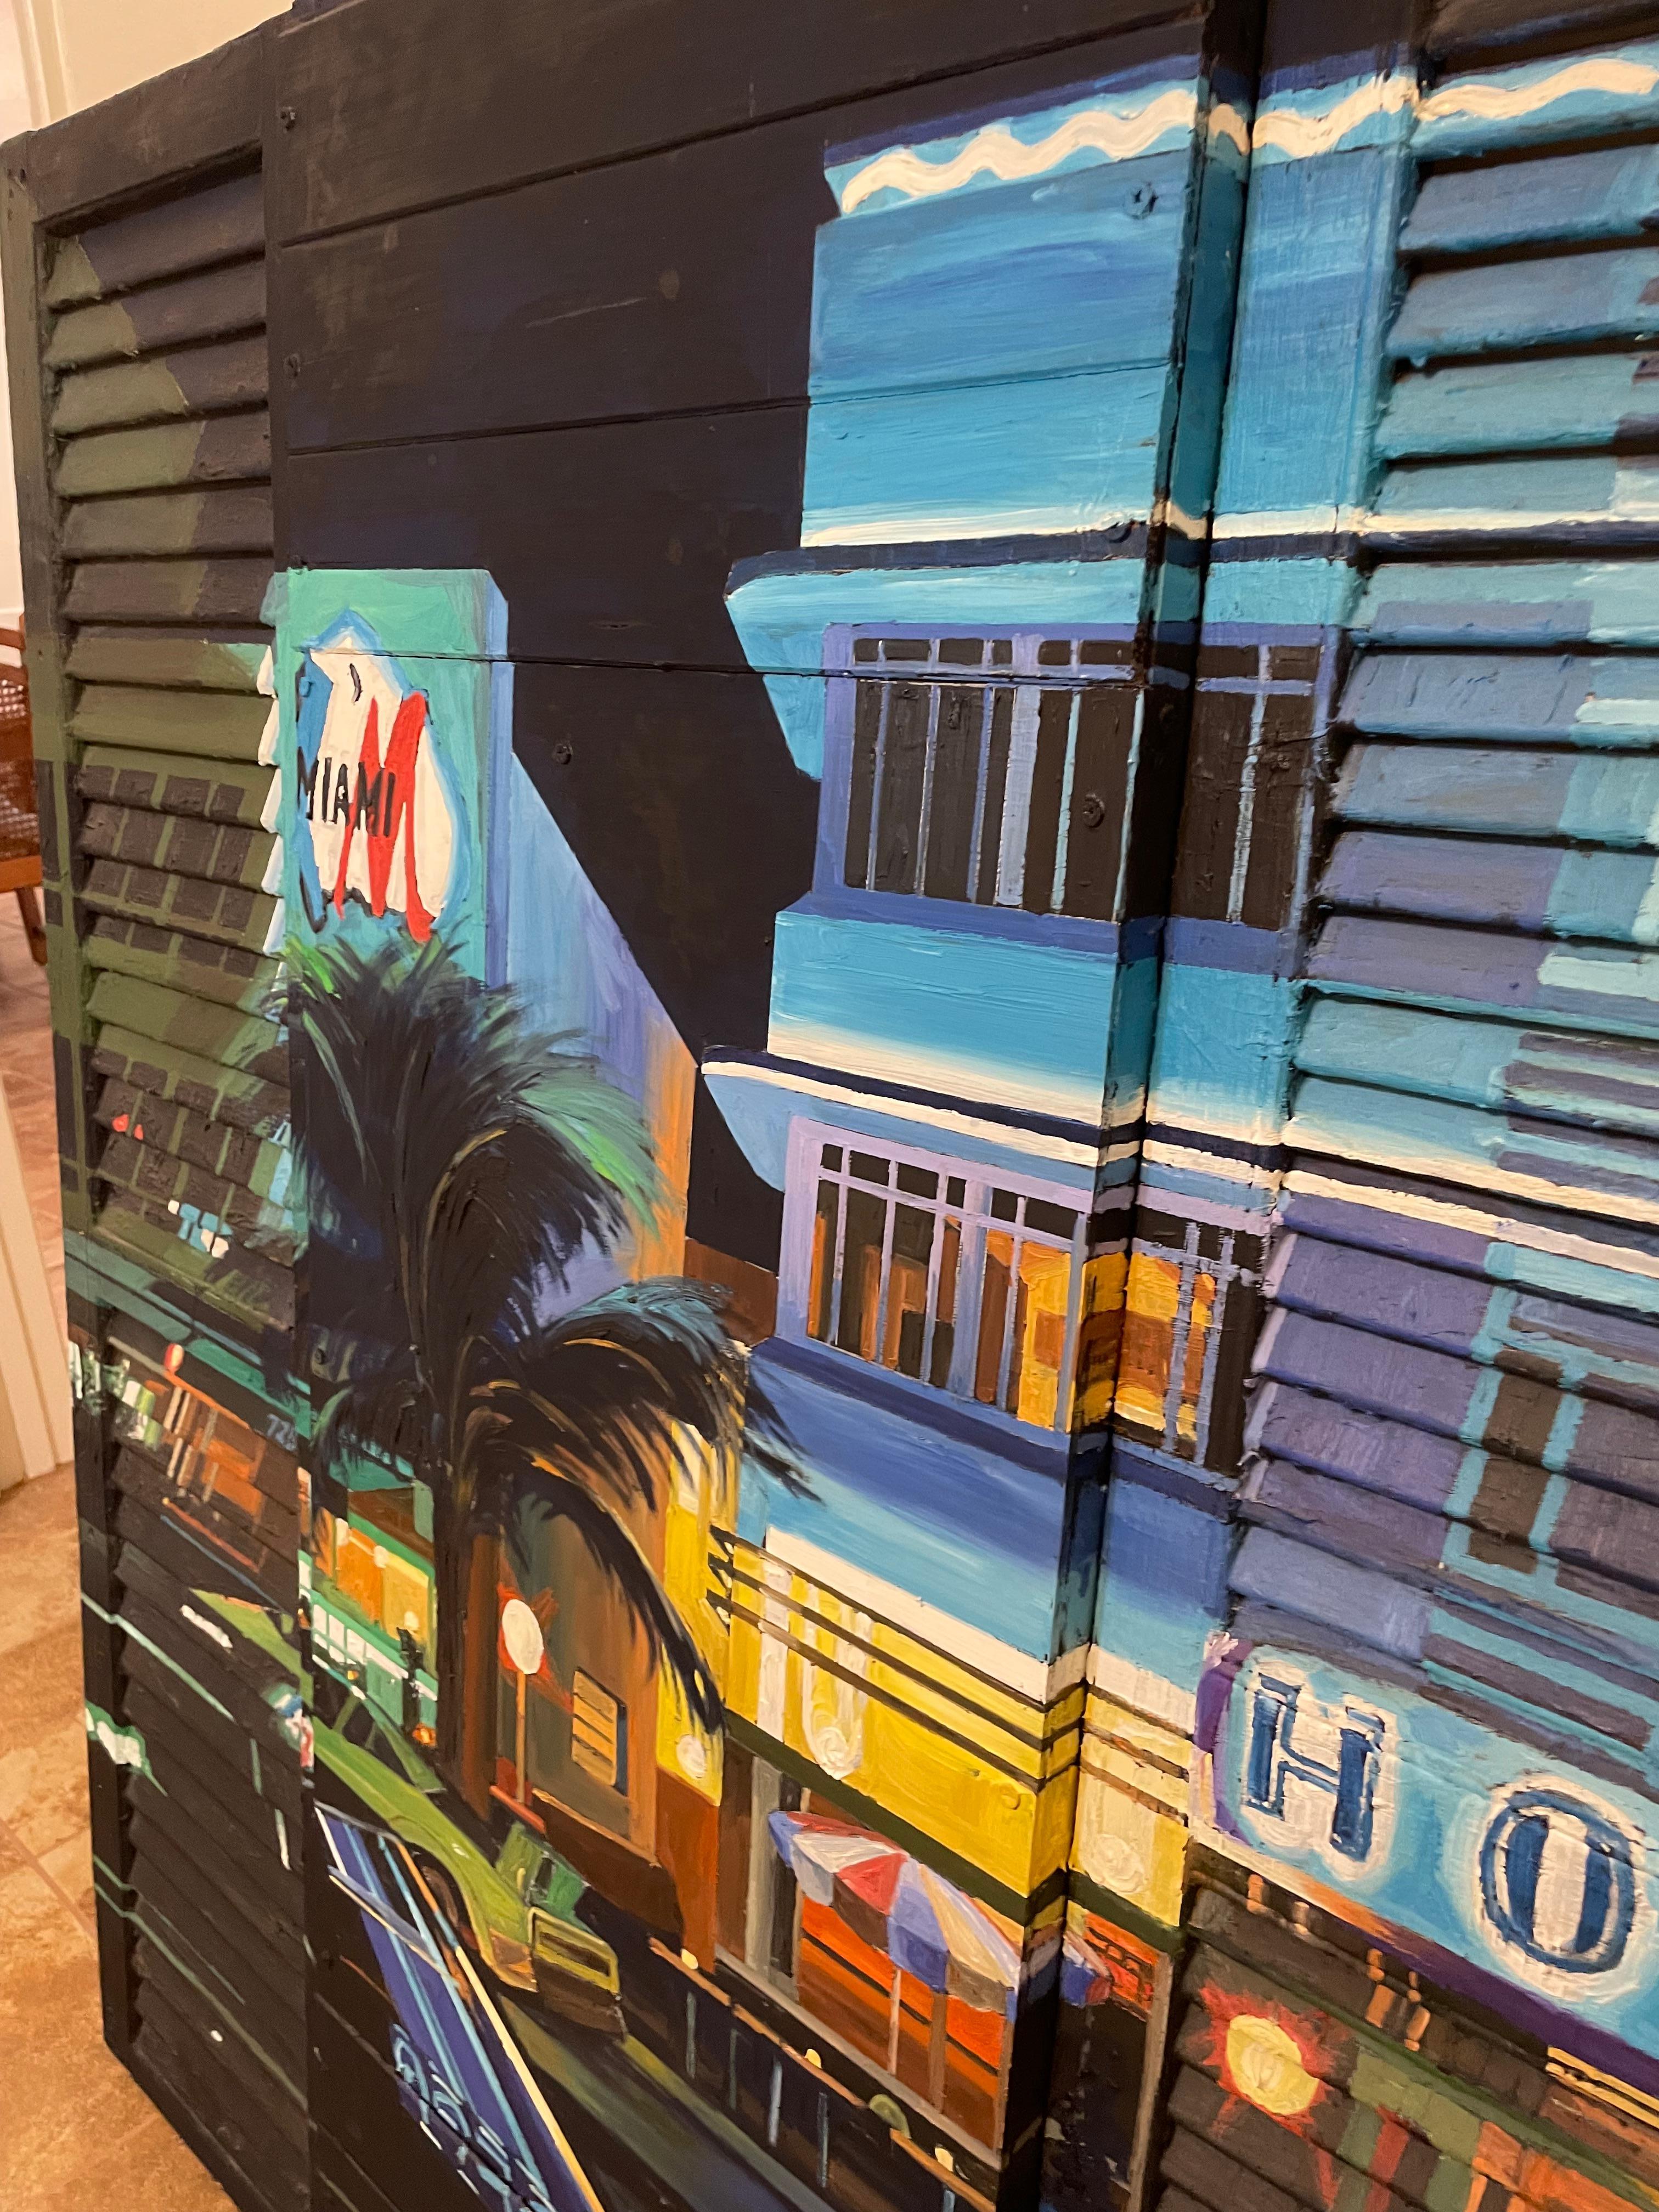 Very large impressive realistic oil and wax on wood painting of a vacation street strip with illuminated hotel and palm trees. The surface has multiple levels and 3 dimensionality with painting on mixed media with wood panel and incorporated